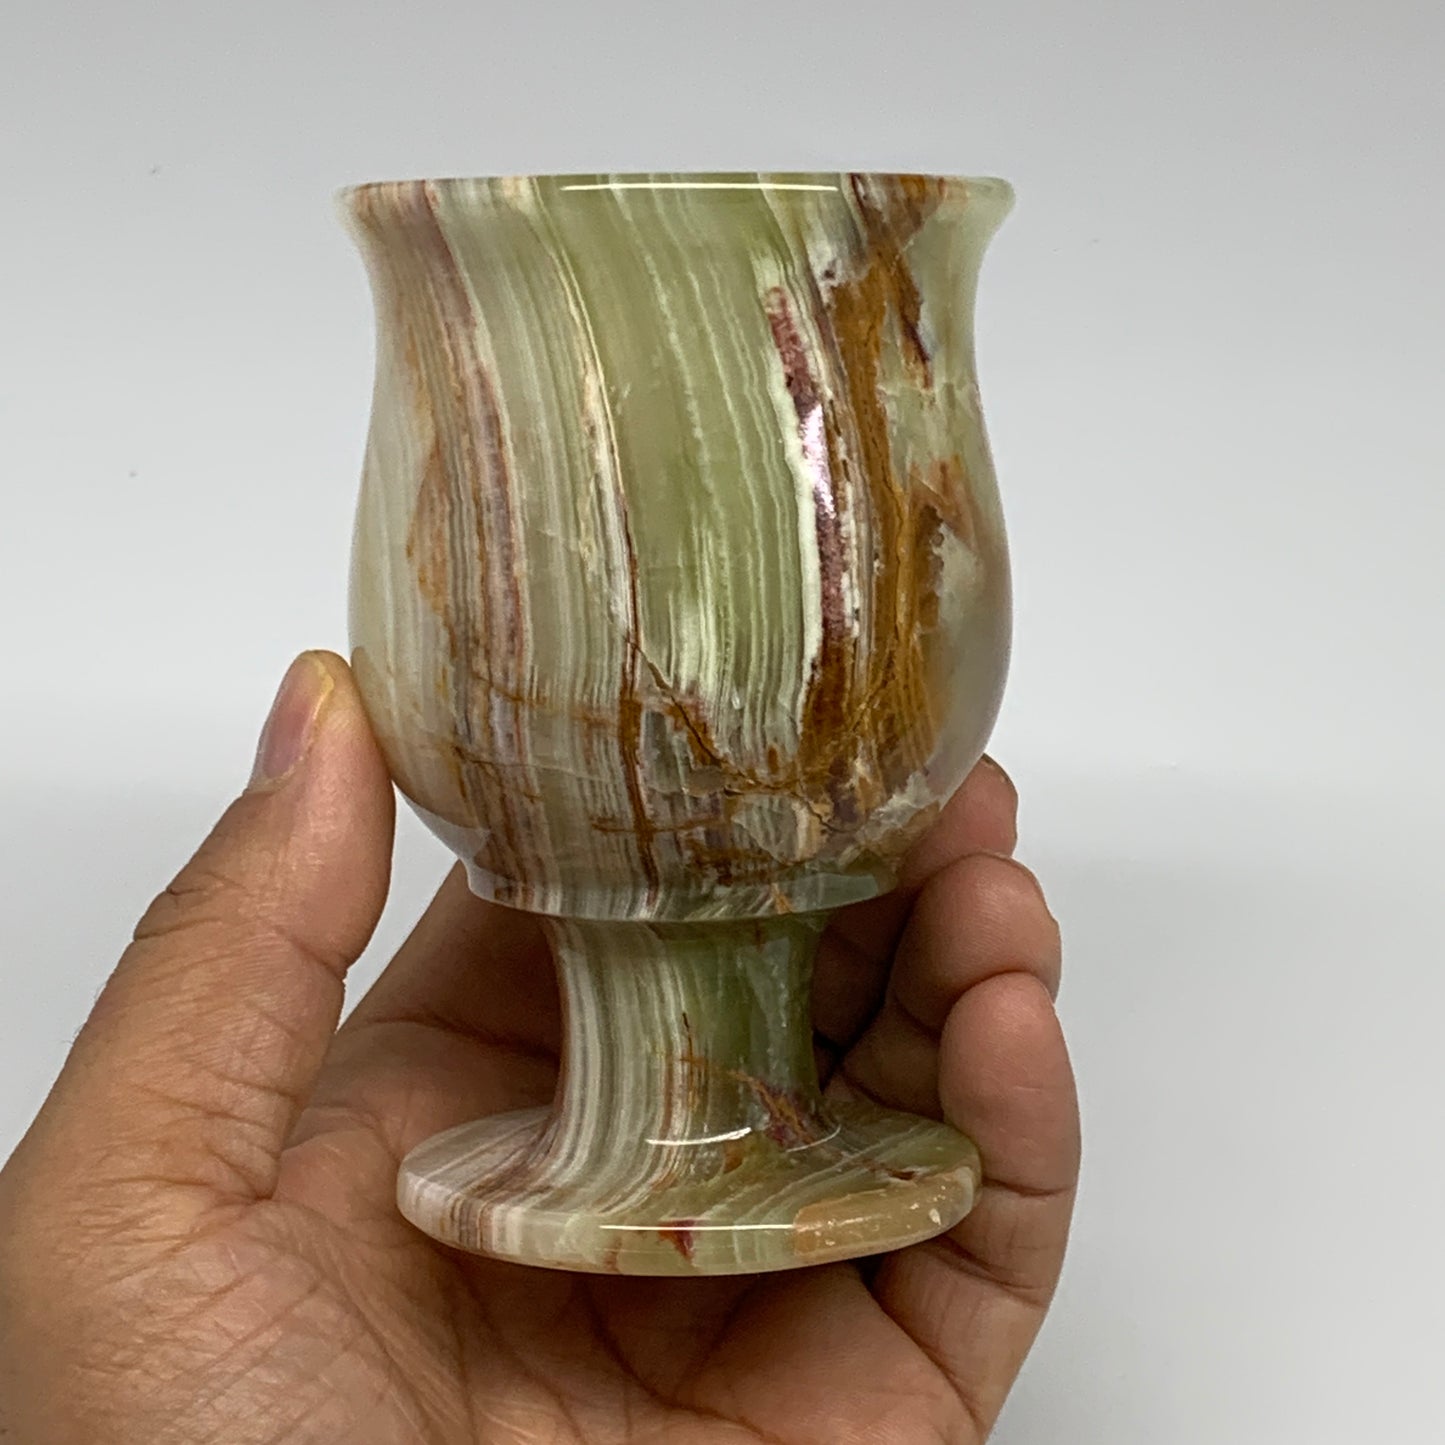 229.9g, 3.8"x2.4" Natural Green Onyx Cup Gemstone from Afghanistan, B3202